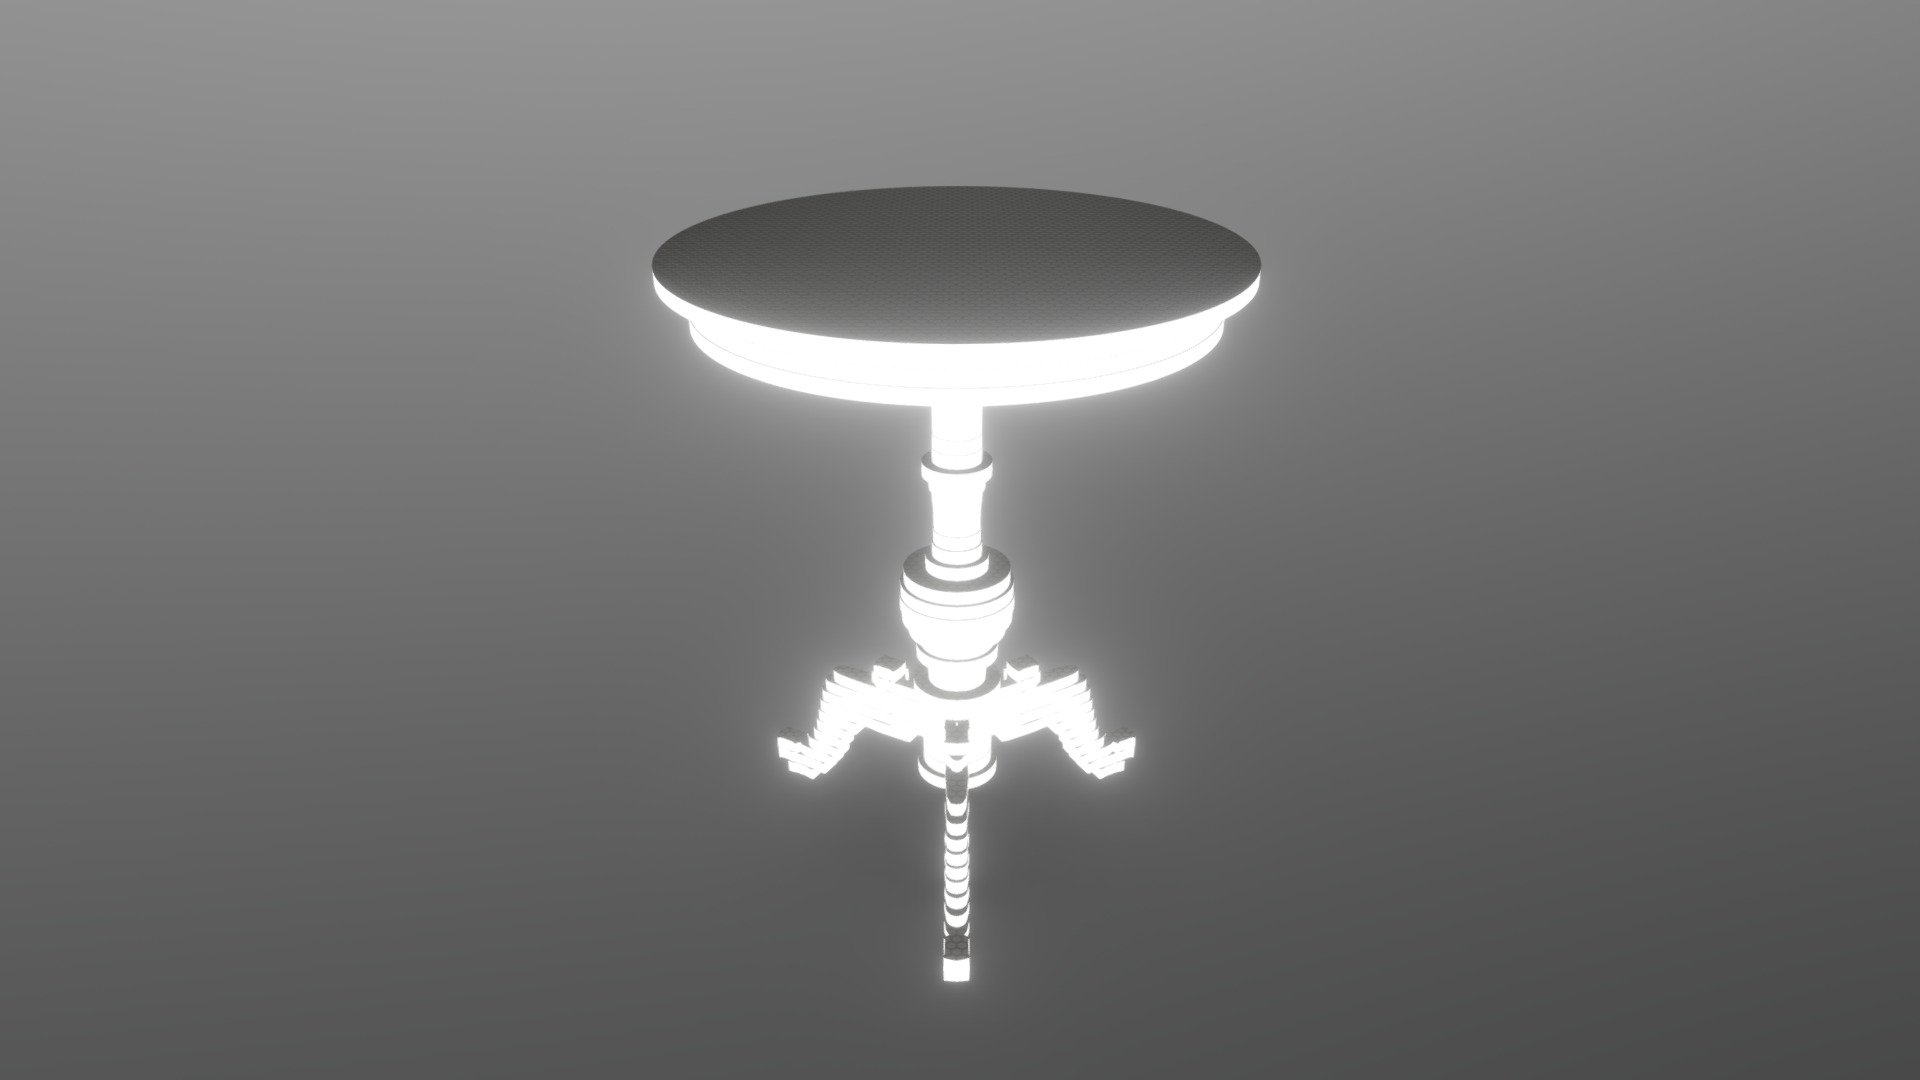 #30daysinVR Replica Table A by Enea LeFons